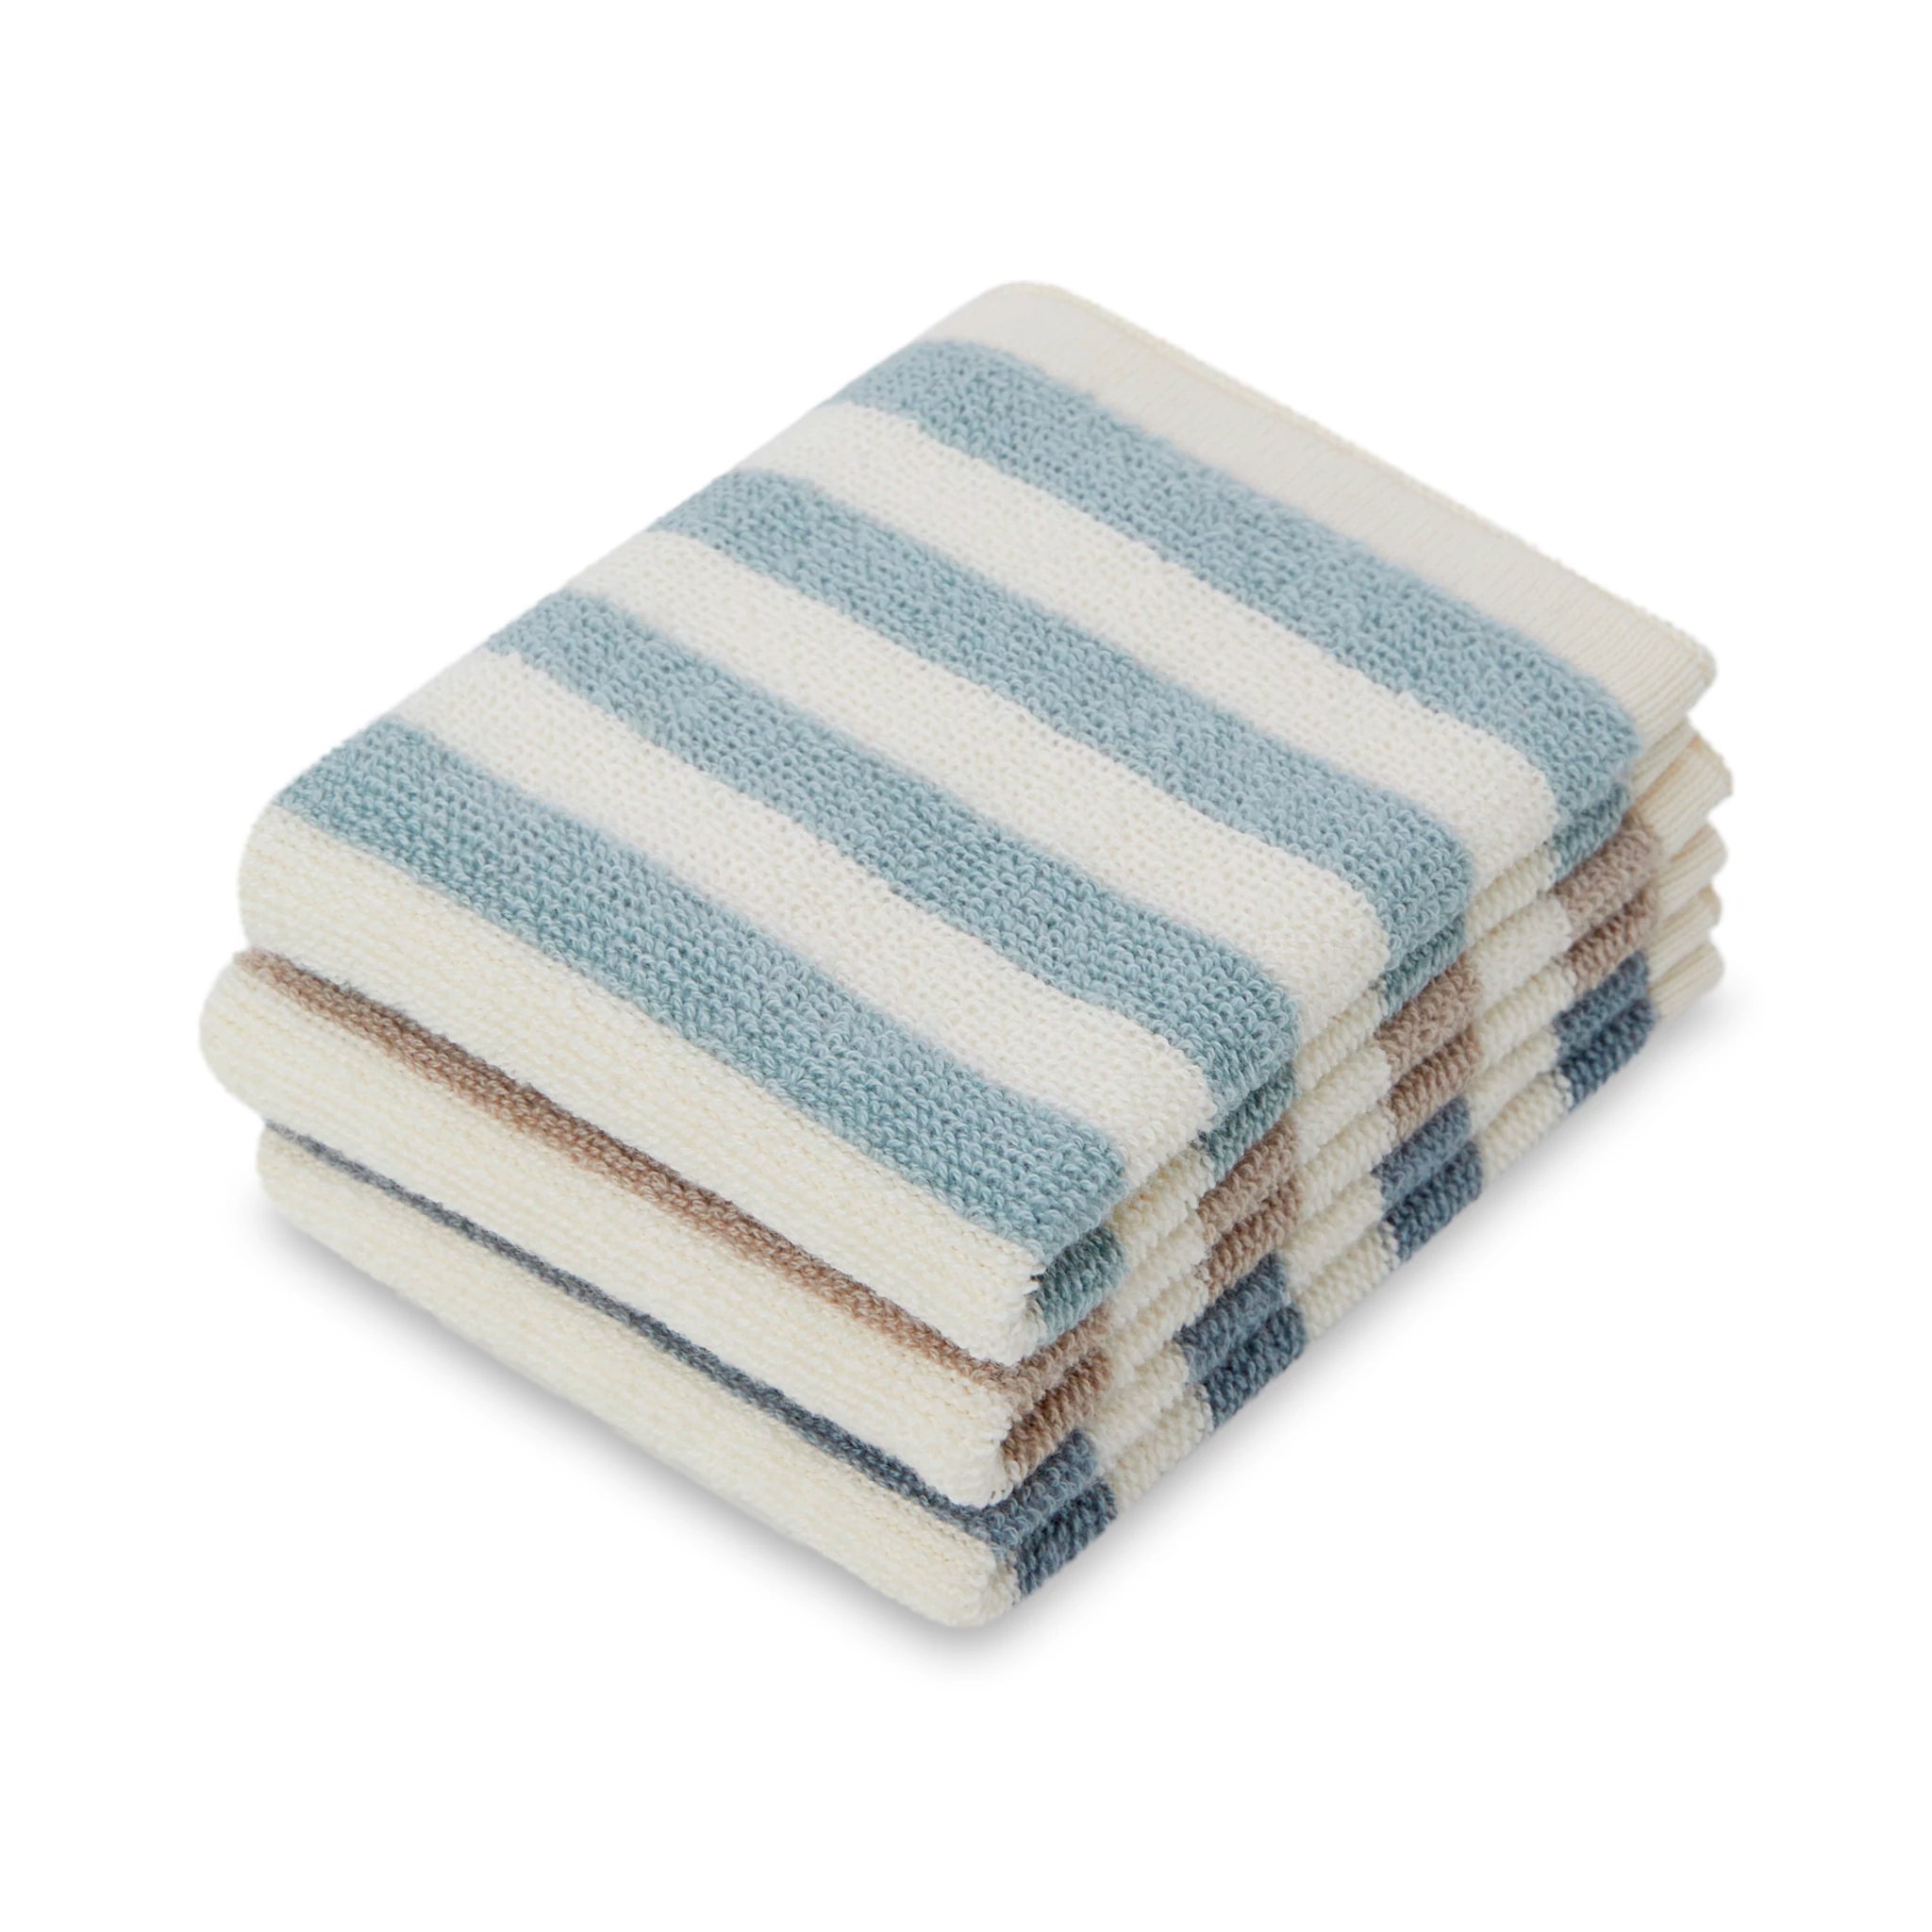 Reusable Terry Washcloths | Set of 3 | Striped Aqua | by Sophie Home - Lifestory